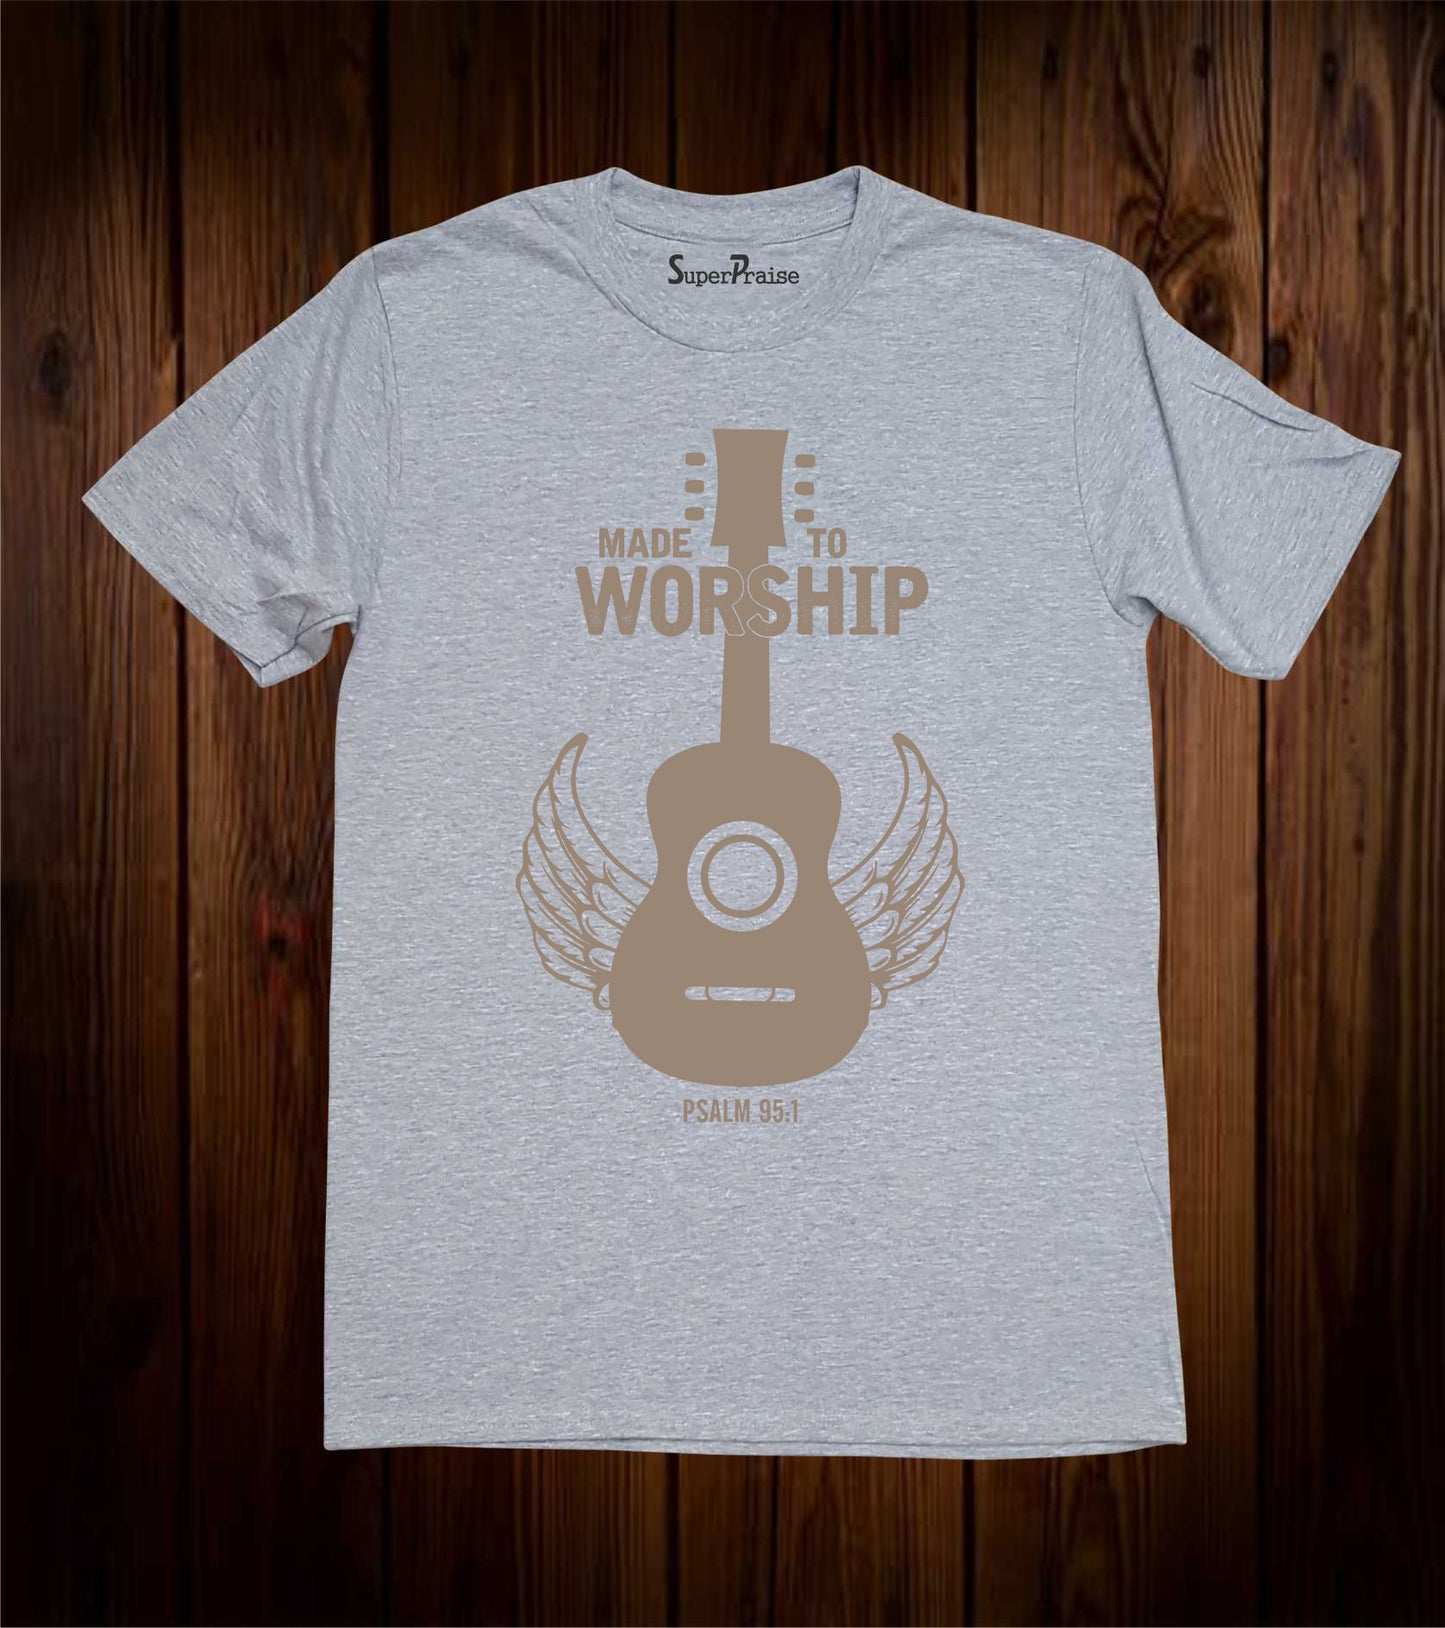 Made To Worship Psalm 95:1 Bible Verse Quotes Christian Faith T-Shirts